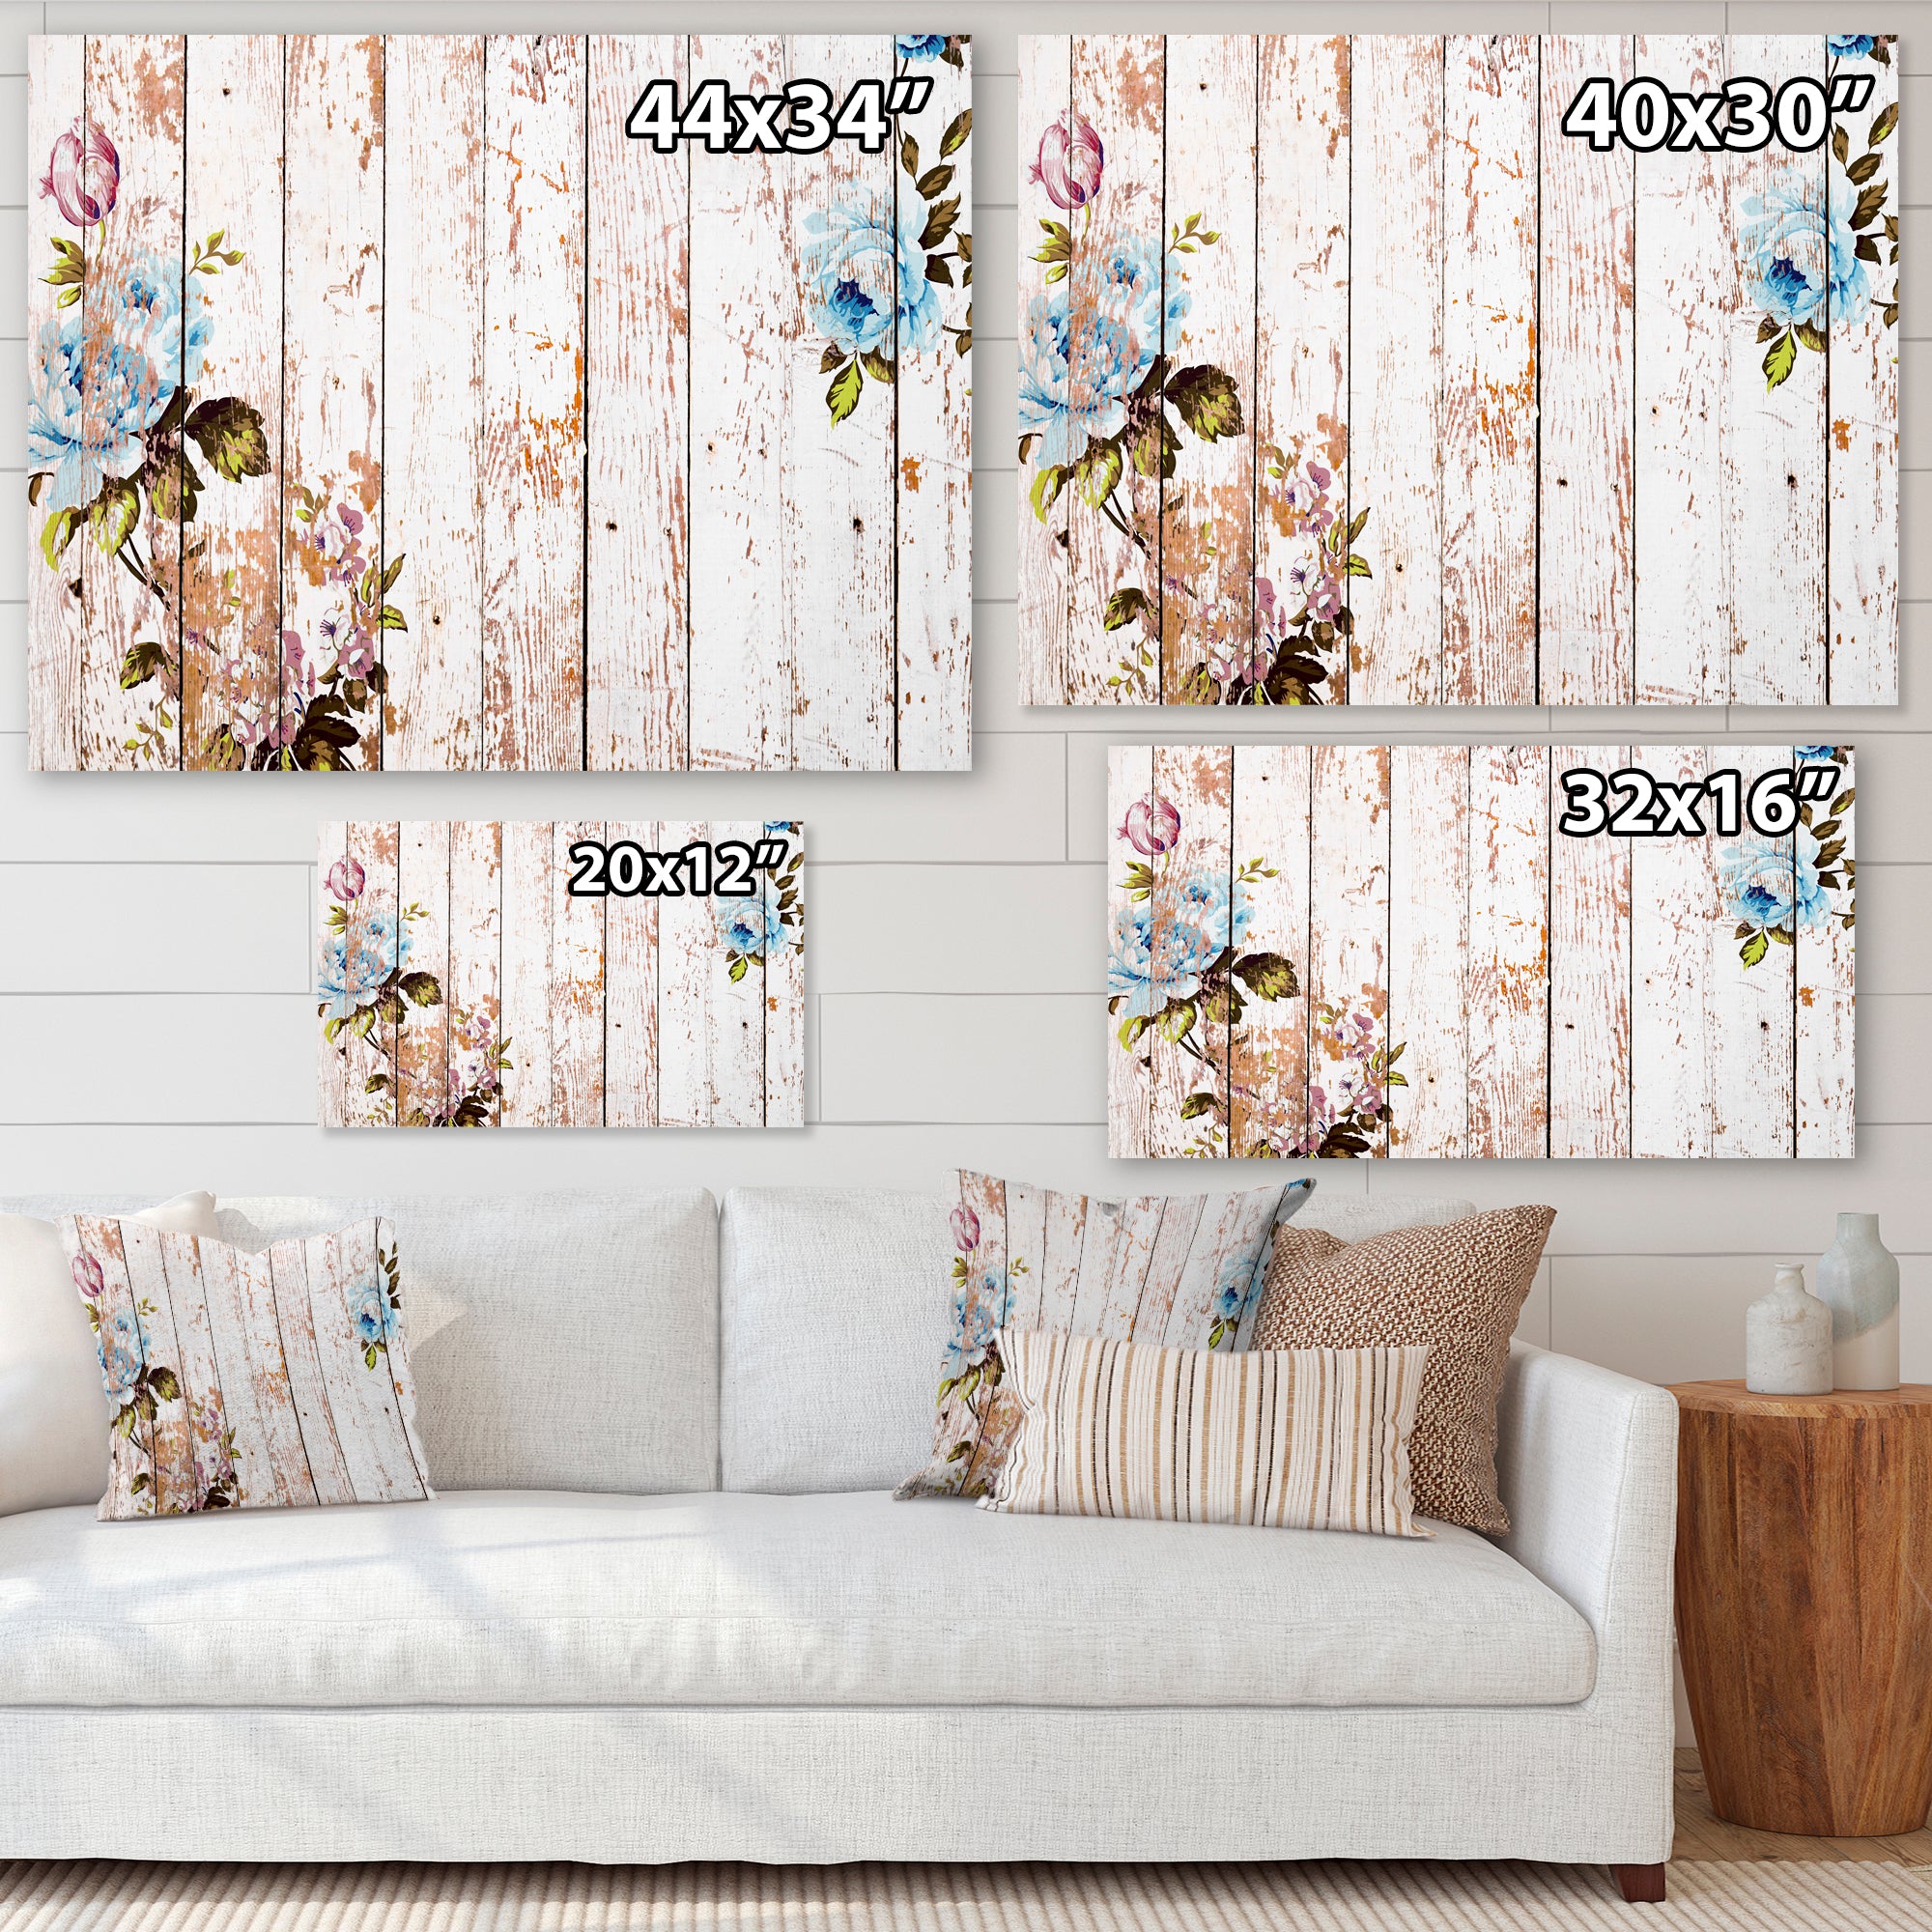 Shabby chic roses on wooden texture